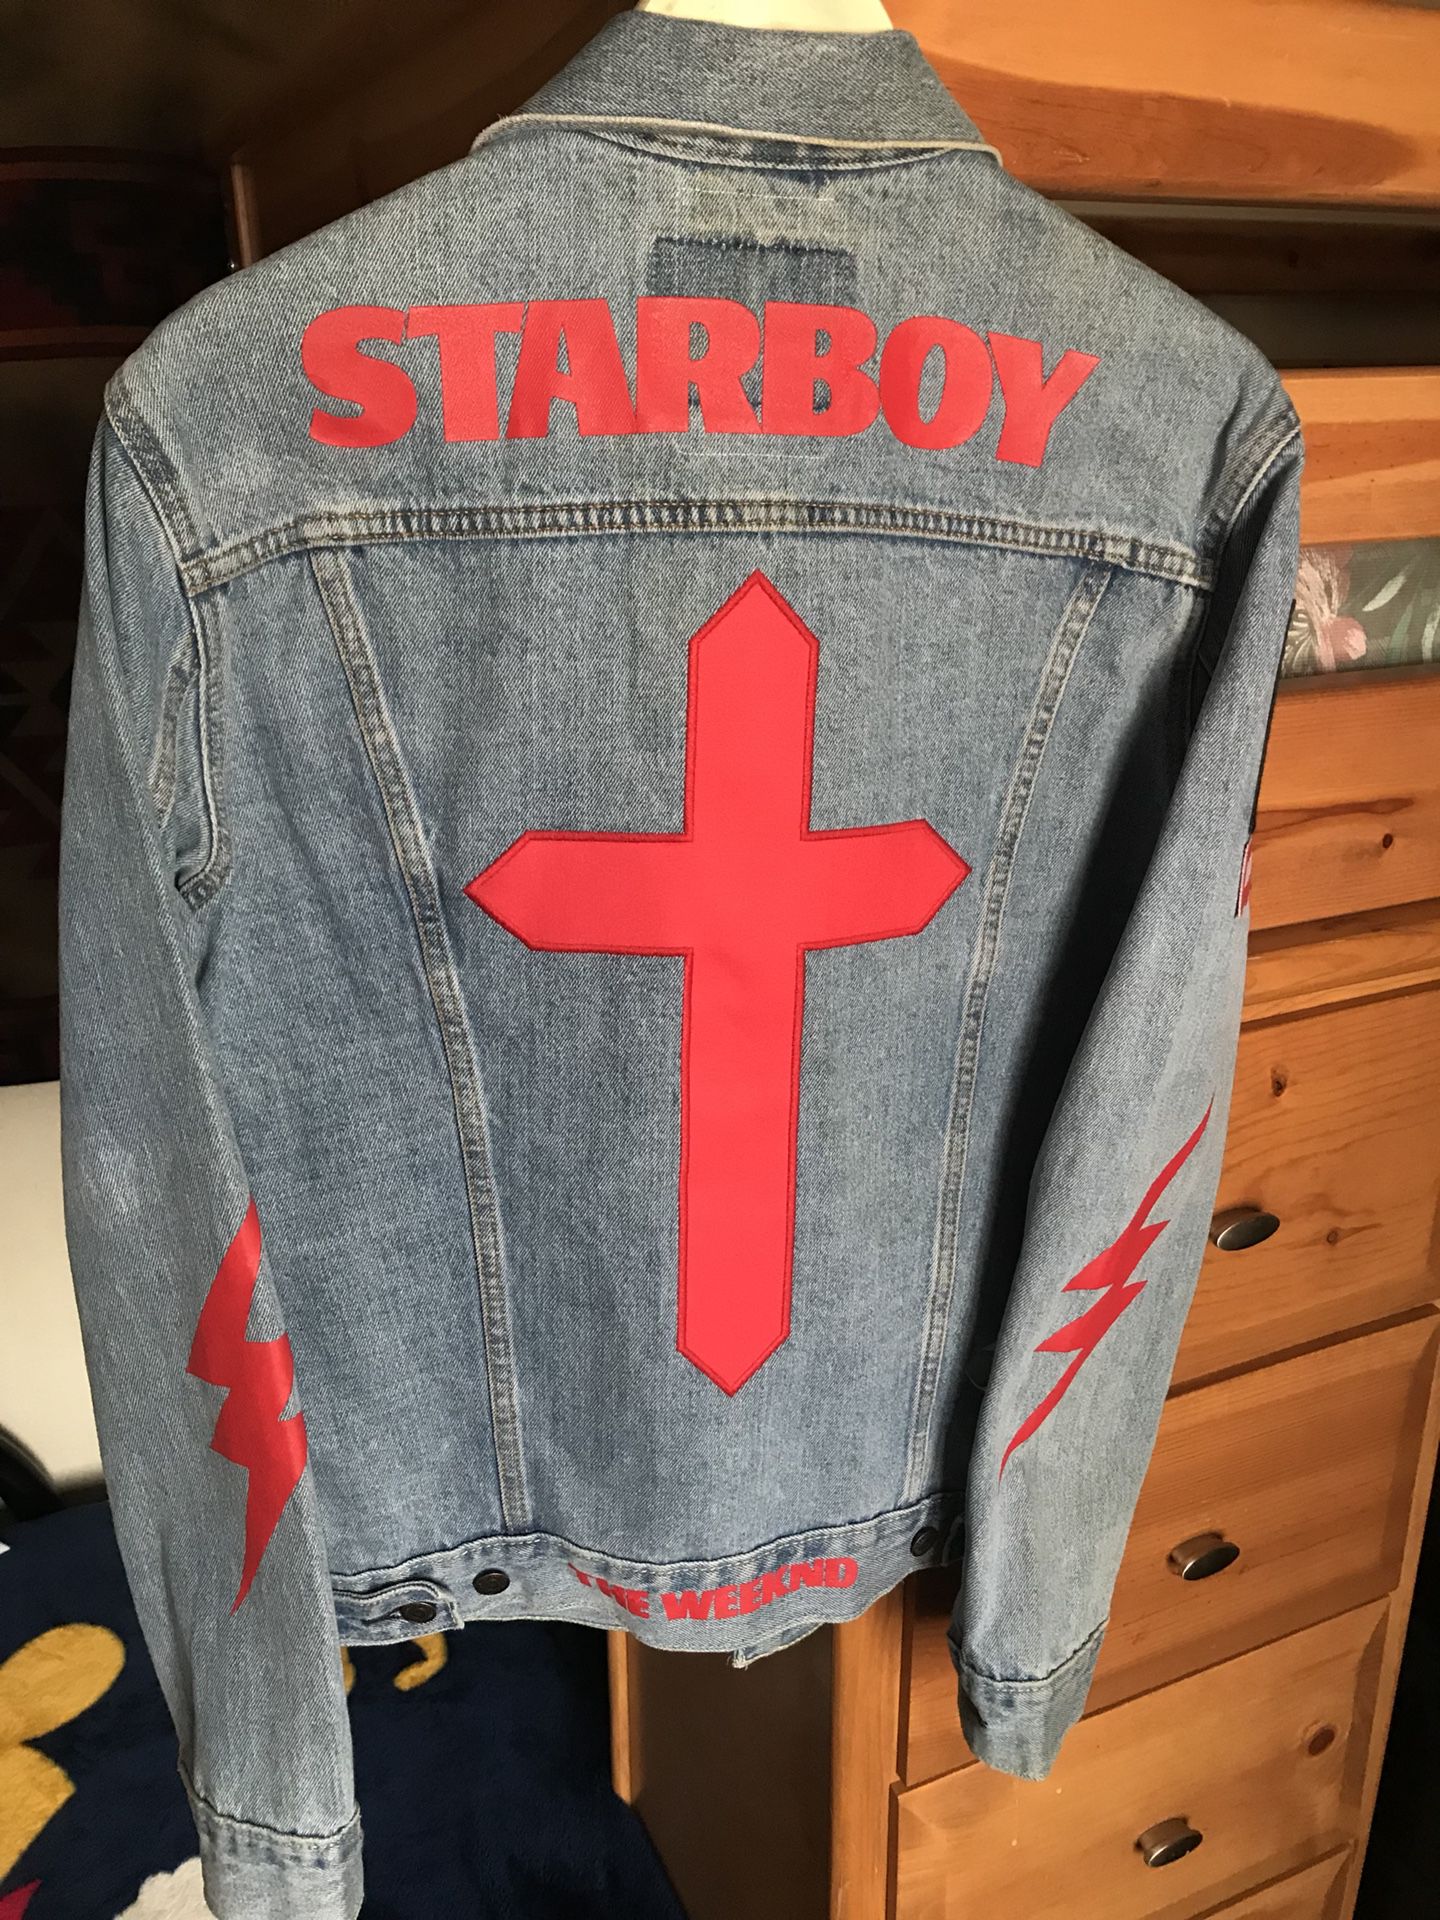 The Weeknd X Levi's Starboy Denim jacket - Large for Sale in